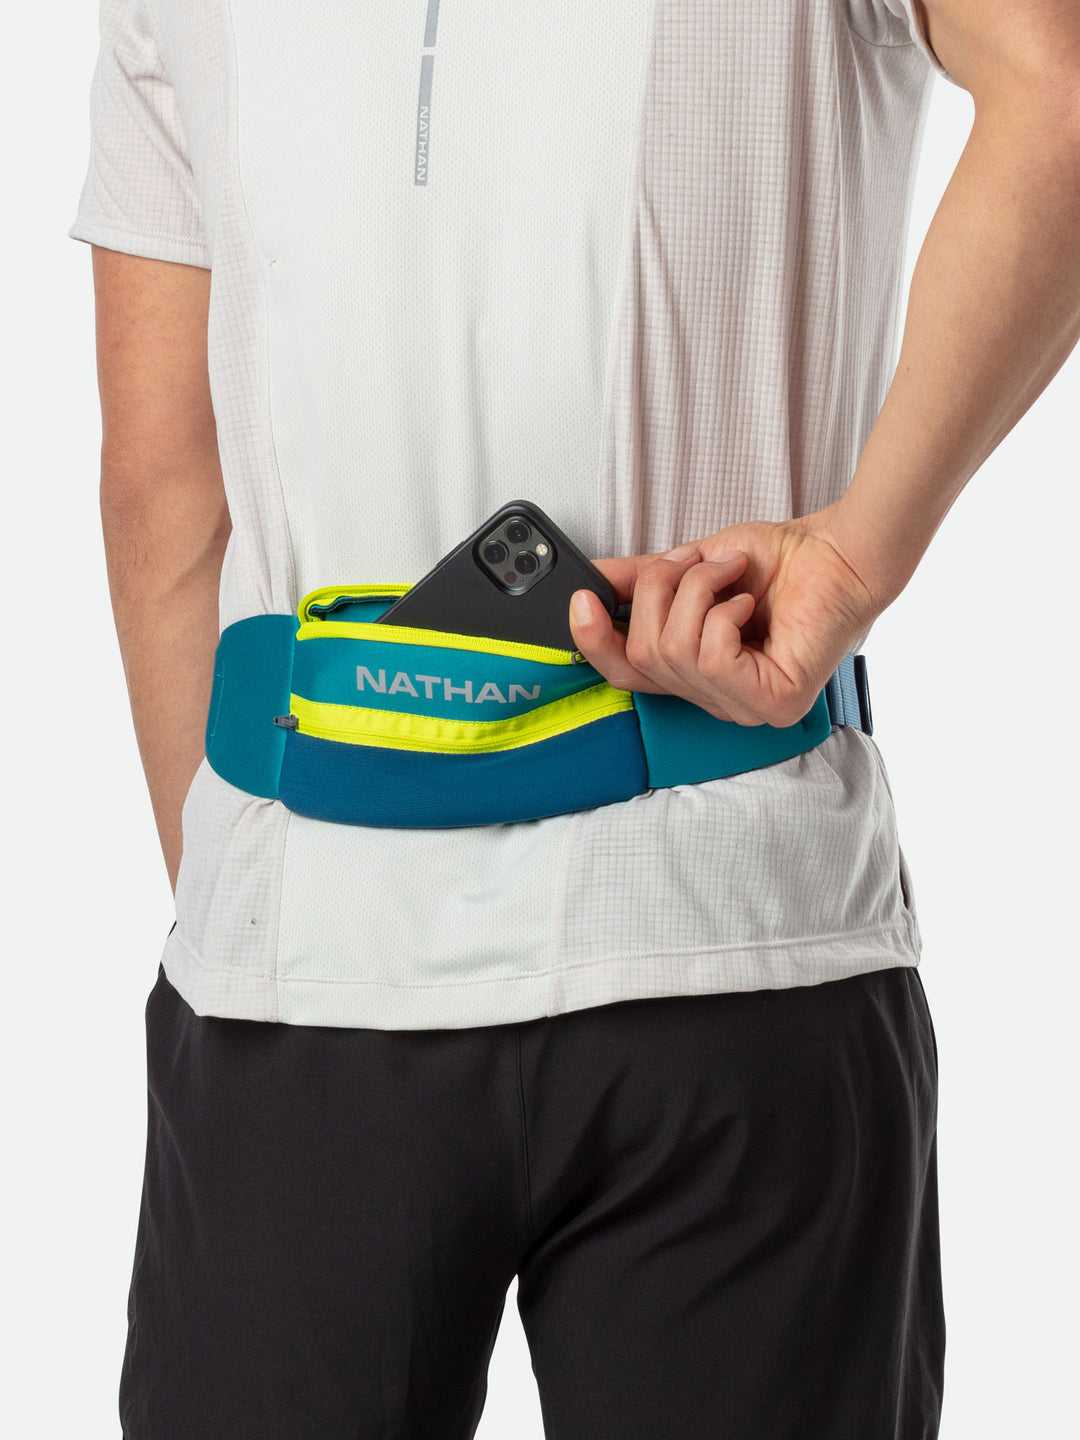 The 10 Best Fanny Packs and Waist Bags for Men to Carry Around in 2022 -  The Manual